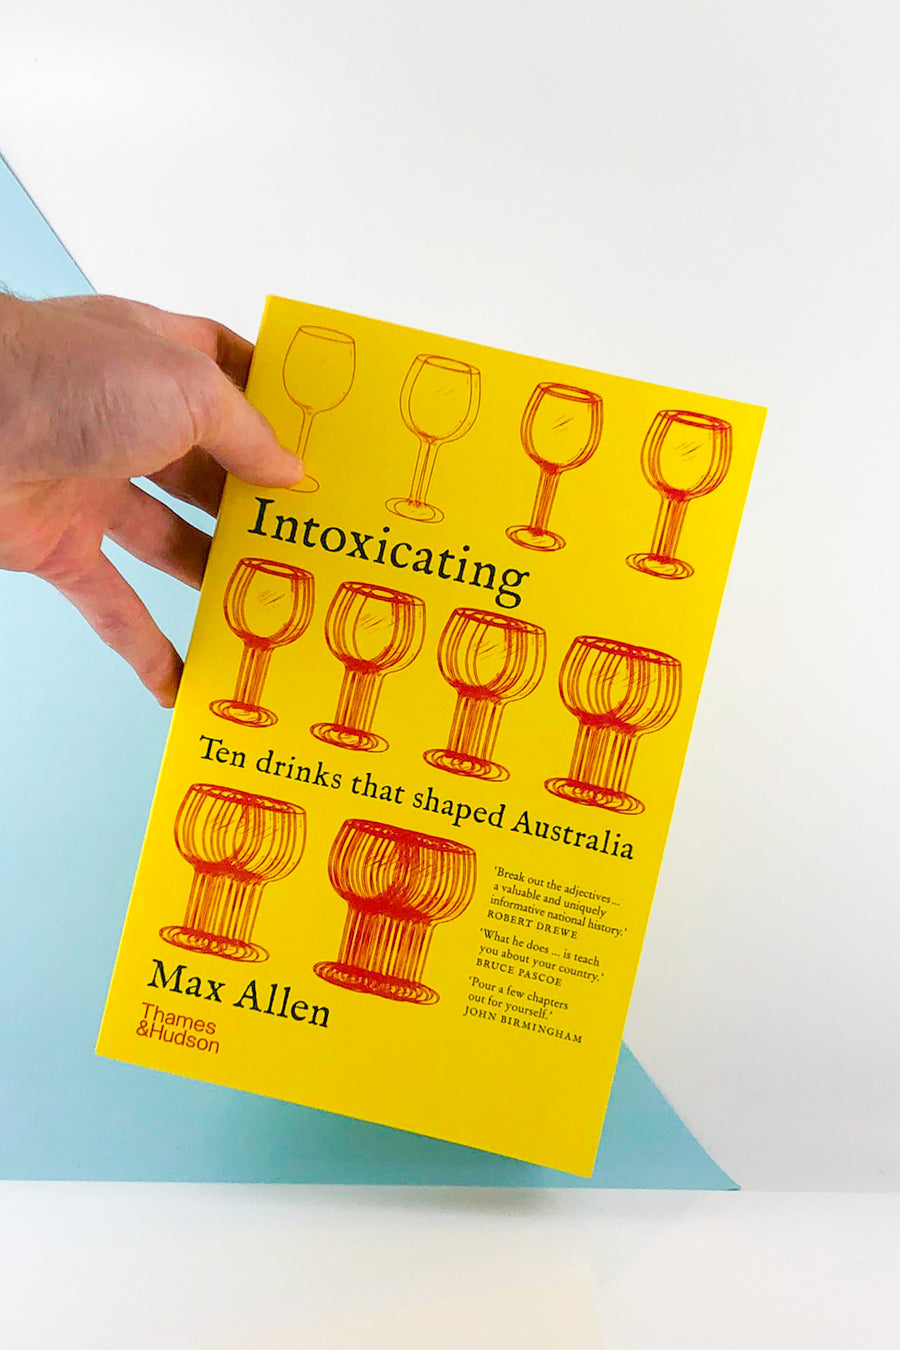 Intoxicating: Ten Drinks That Shaped Australia by Max Allen